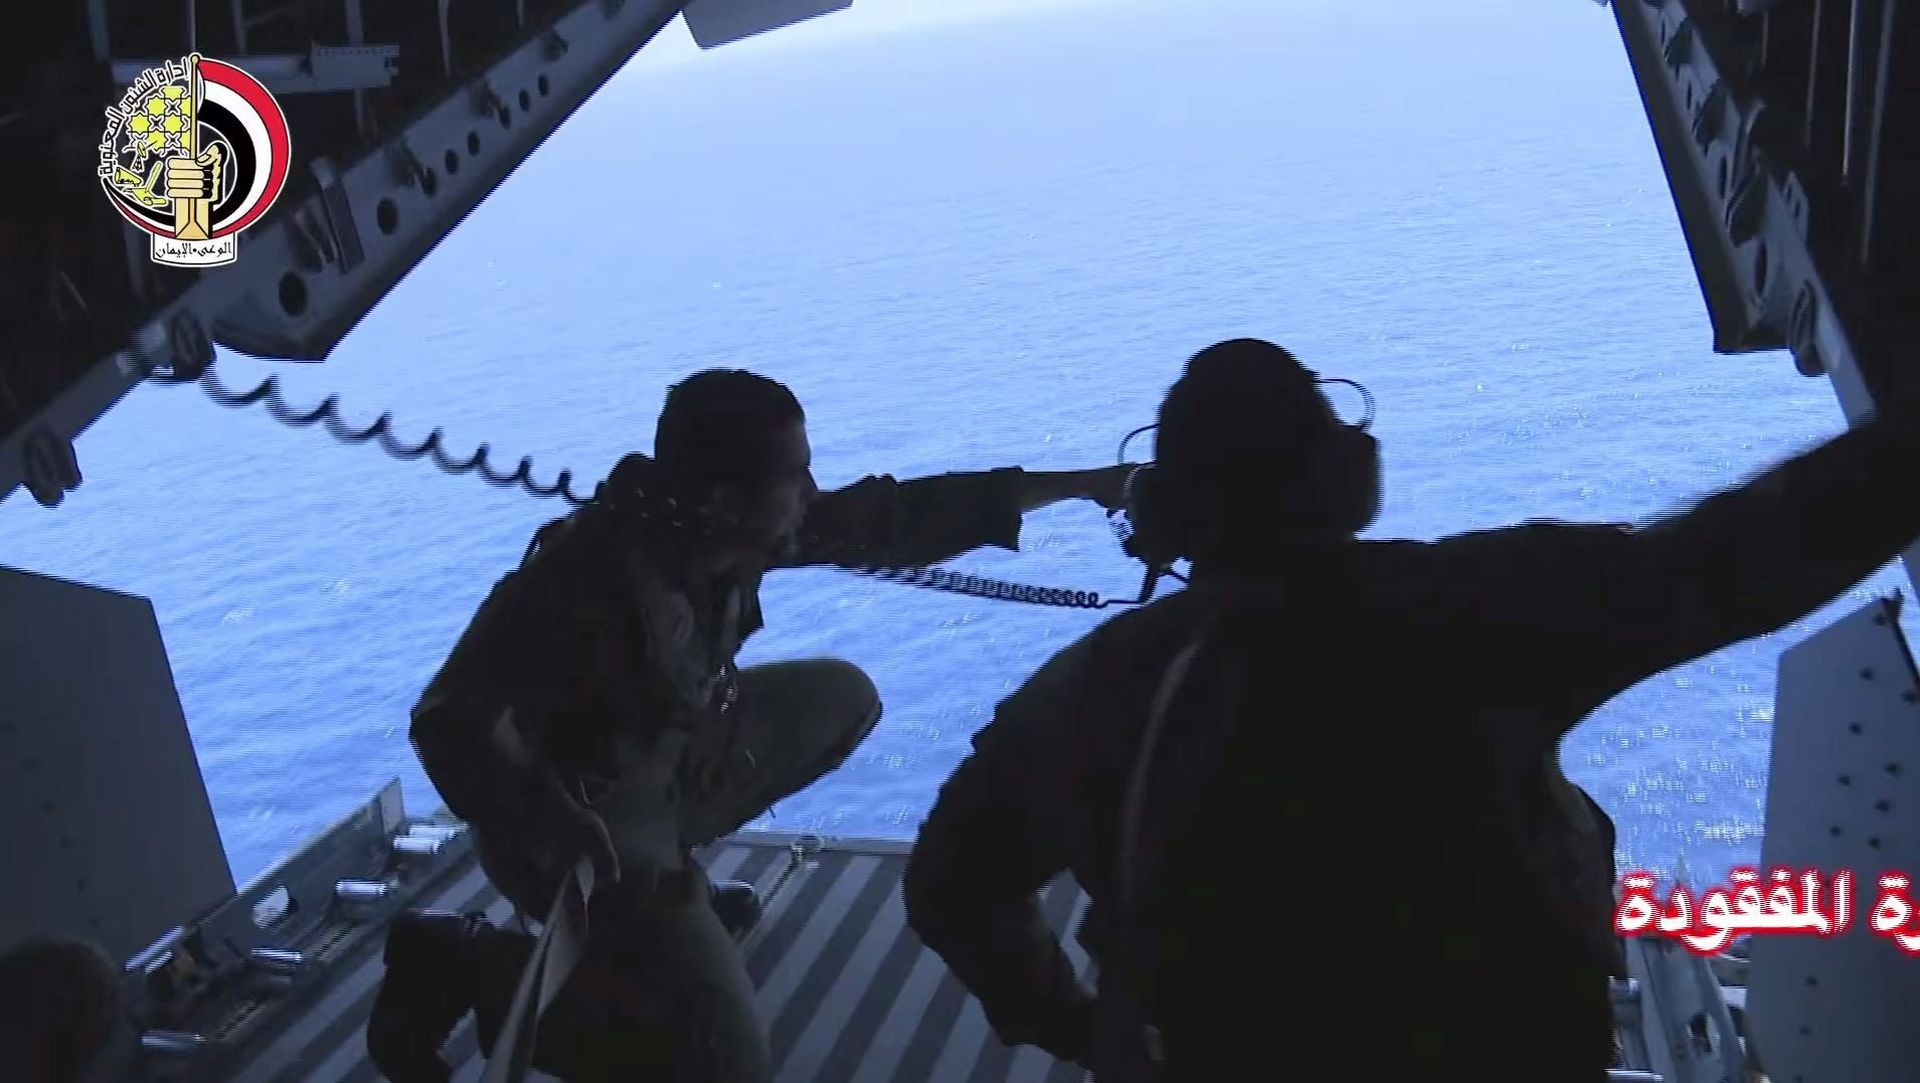 epa05368609 (FILE) A file screen grab taken from a handout video by the Egyptian Defence Ministry on 20 May 2016 shows Egyptian Navy engaged in search operations for missing EgyptAir flight MS804 at sea off the Egyptian coast, north of Alexandria, Egypt. According to a statement by Egyptian investigators on 15 June 2016, the wreckage of the EgyptAir Airbus 320 plane has been found. The EgyptAir passenger jet had left Paris bound for Cairo with 66 people on board, but crashed into the Mediterranean Sea early on 19 May for unknown reasons.  EPA/EGYPTIAN DEFENCE MINISTRY/HANDOUT  HANDOUT EDITORIAL USE ONLY/NO SALES